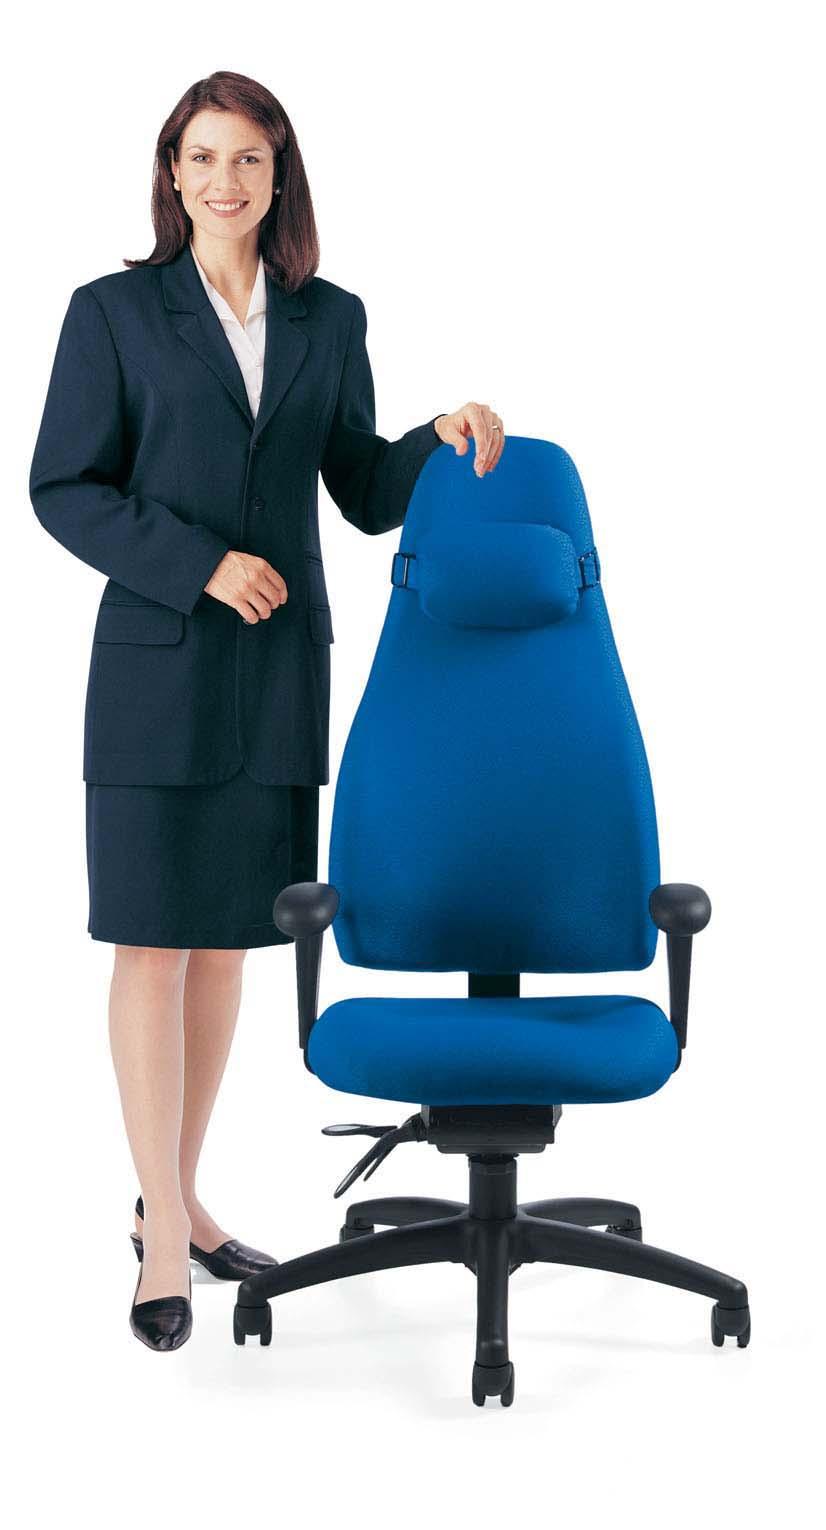 Features Molded foam in seat and back provides greater support Adjustable headrest or lumbar pad Unique hugging action of the world famous OBUSFORME provides unparalleled lower back (lumbar) support